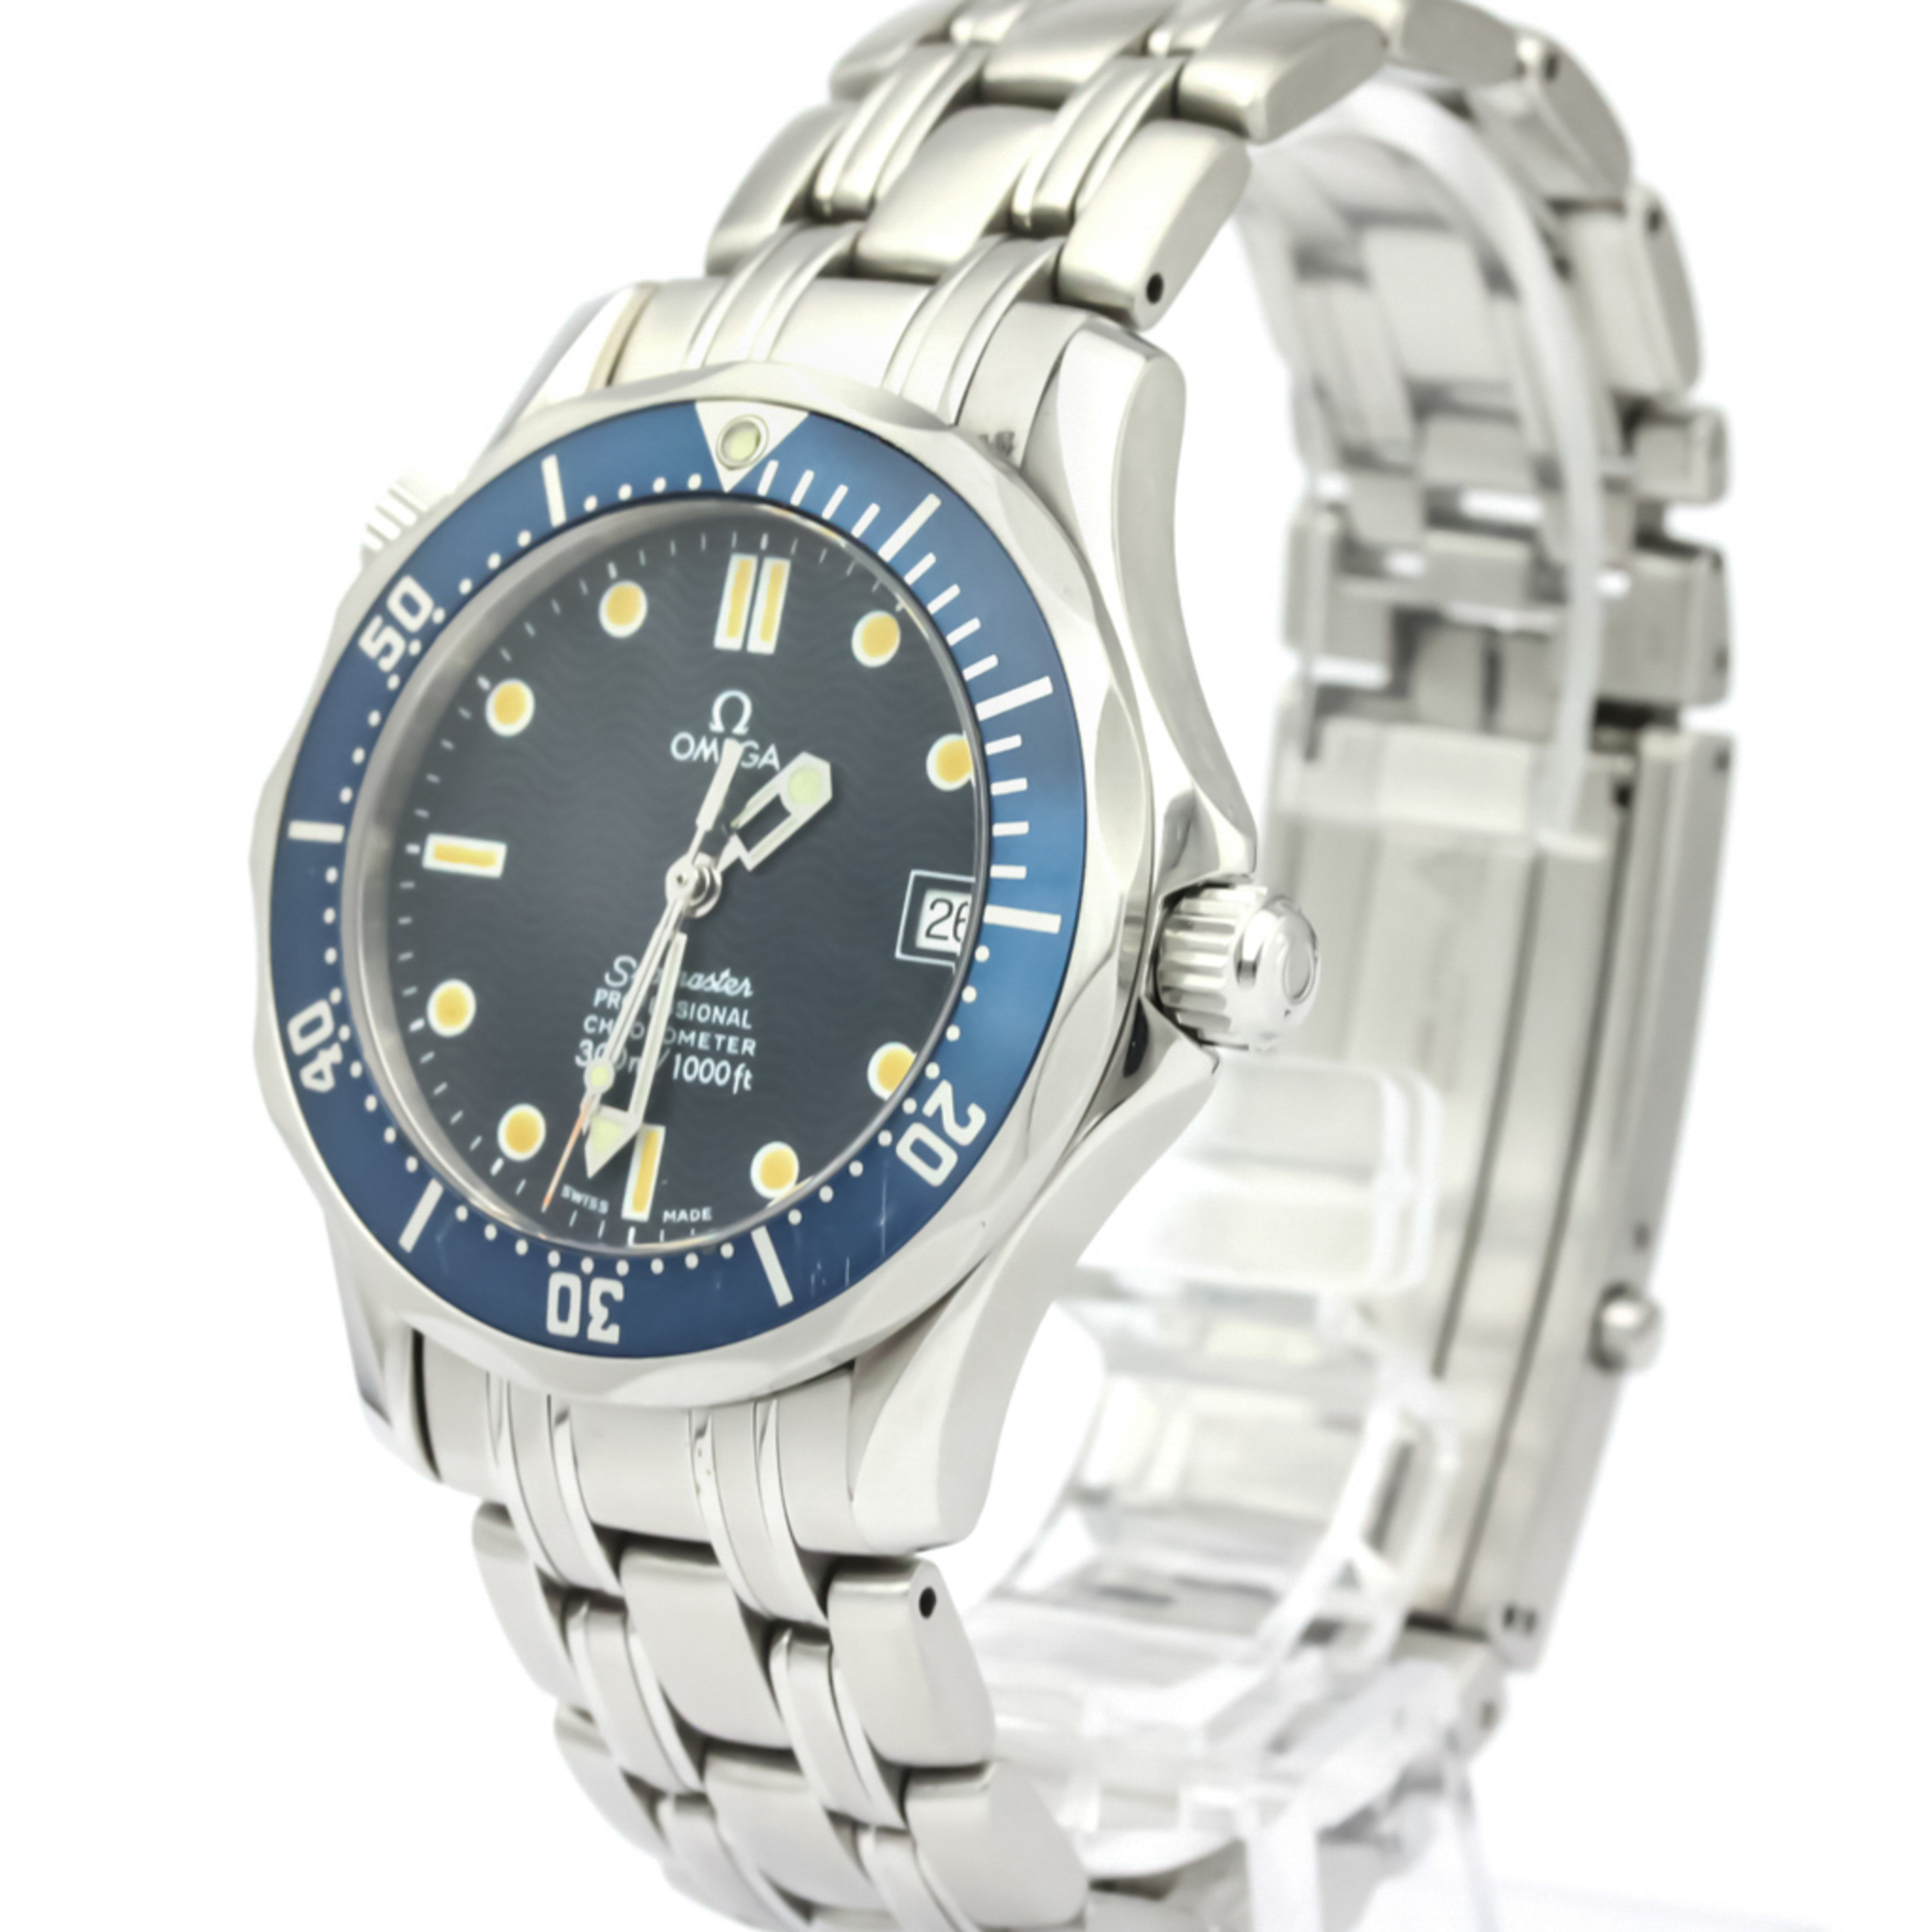 OMEGA Seamaster Professional 300M Mid Steel Size Watch 2551.80